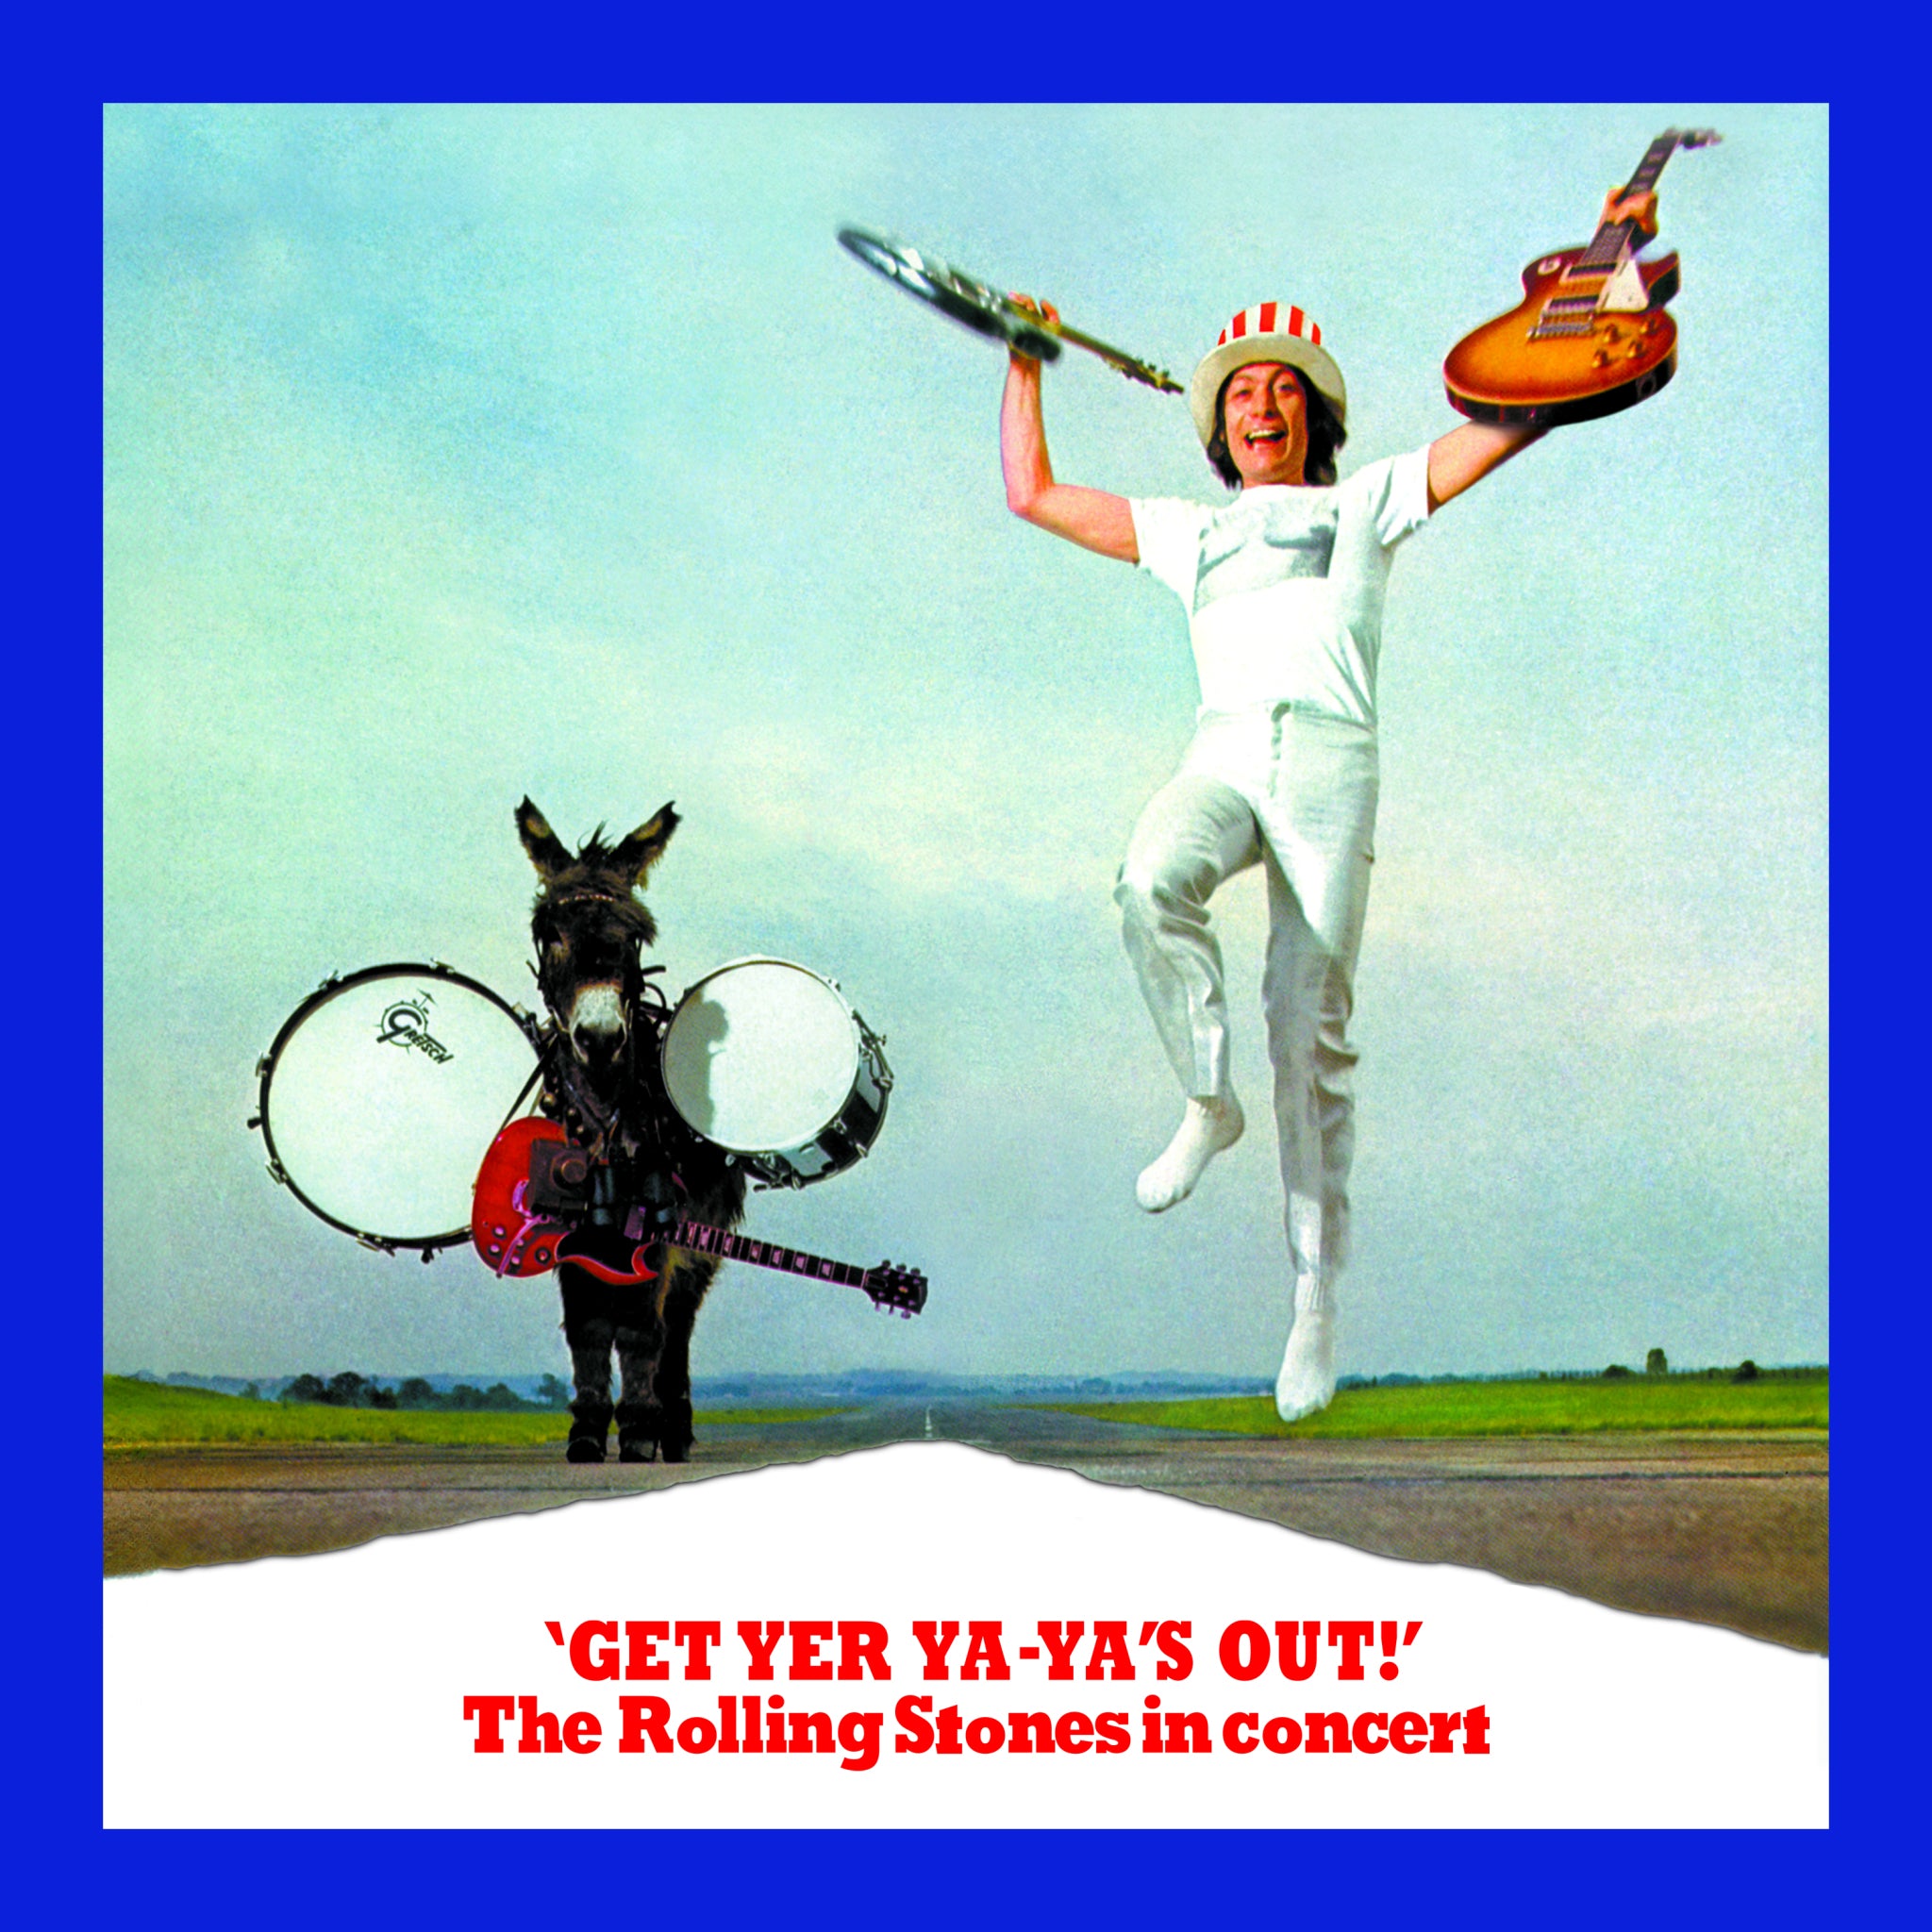 The Rolling Stones - Get Yer Ya-Ya's Out: Vinyl LP